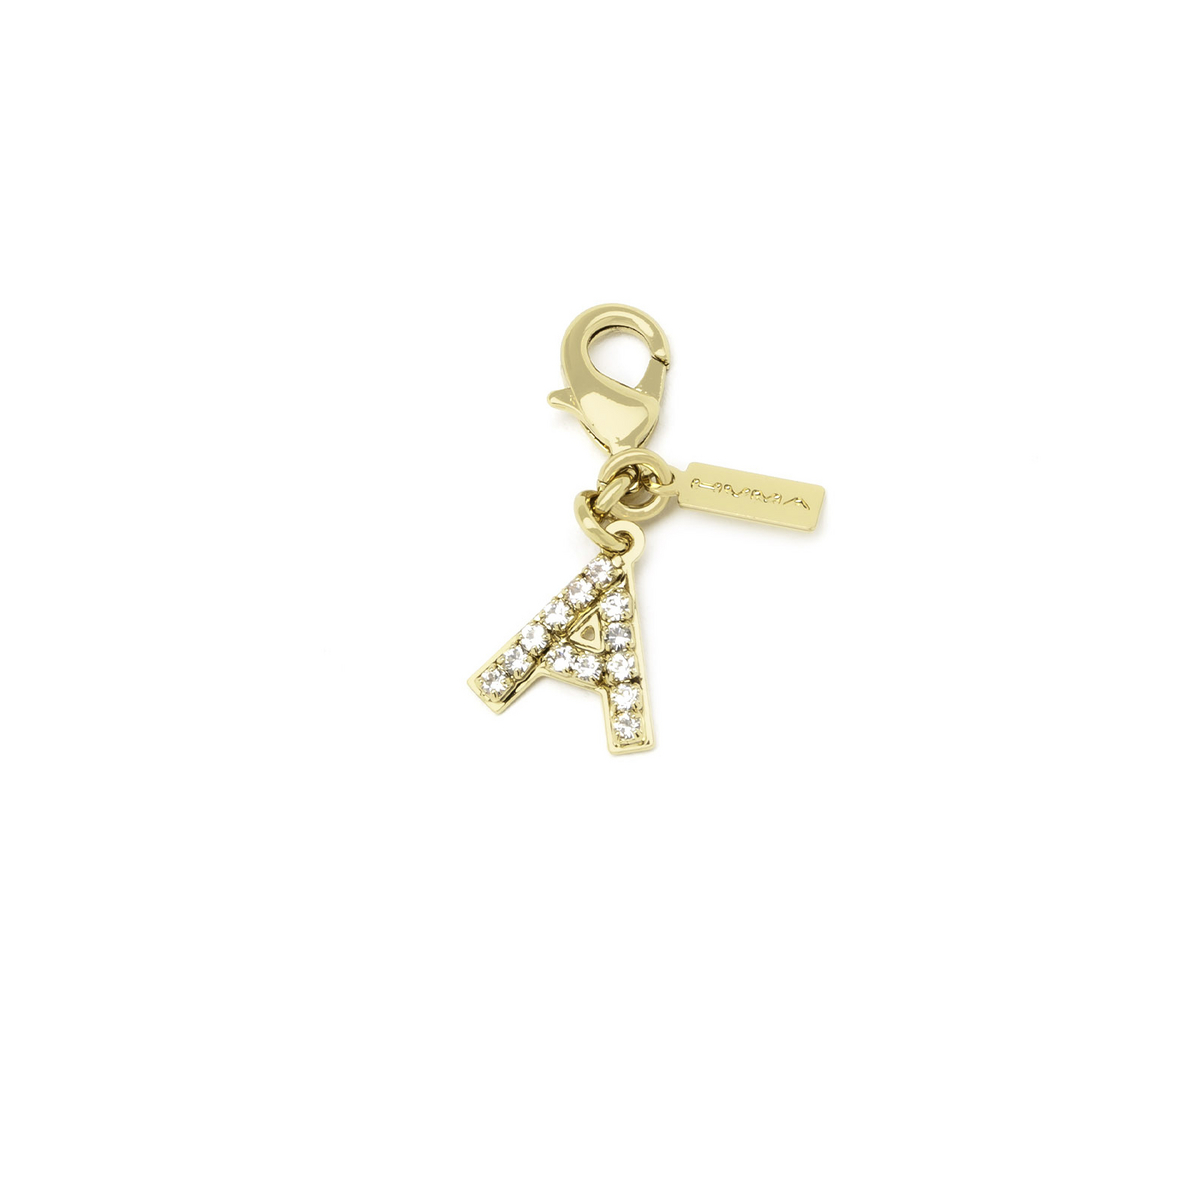 Huma® Accessories: Letter Charm color Gold & Crystal E02-4 - 3/3.